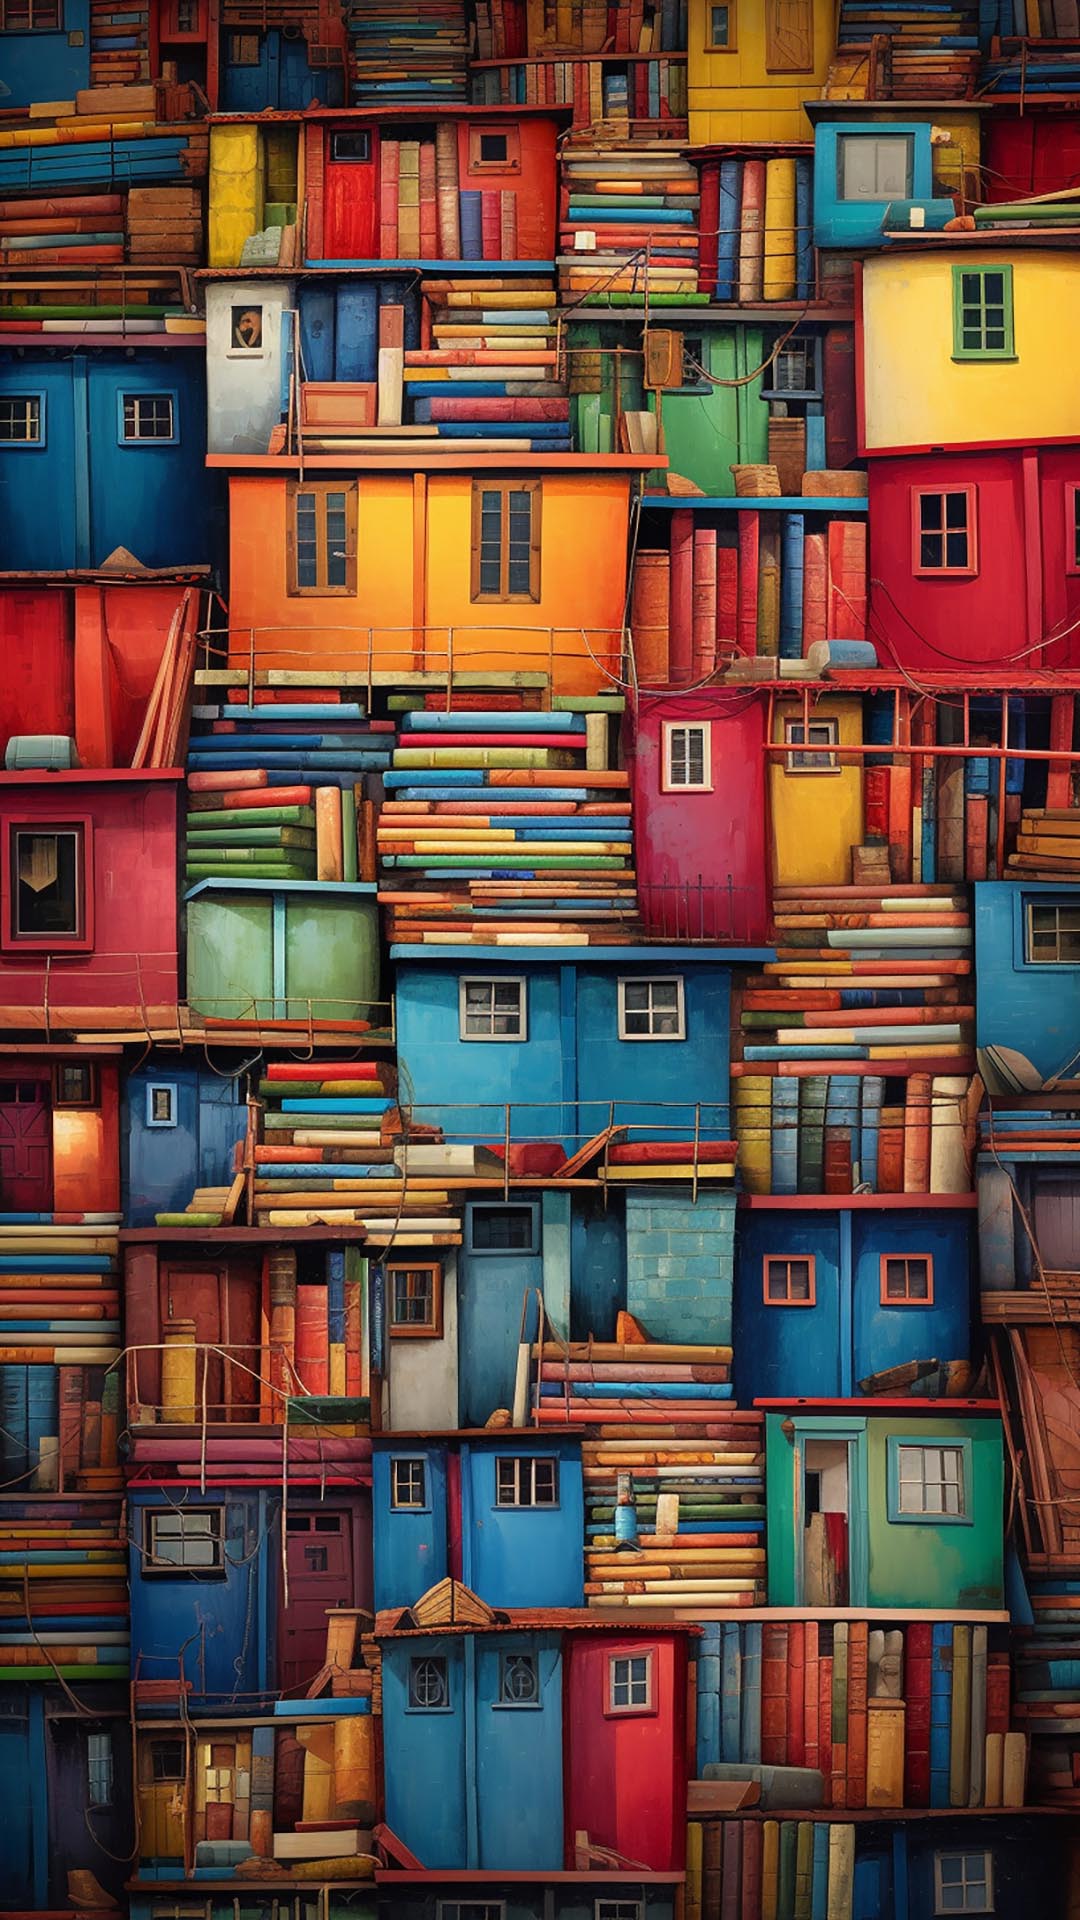 Crowded housing book wallpaper